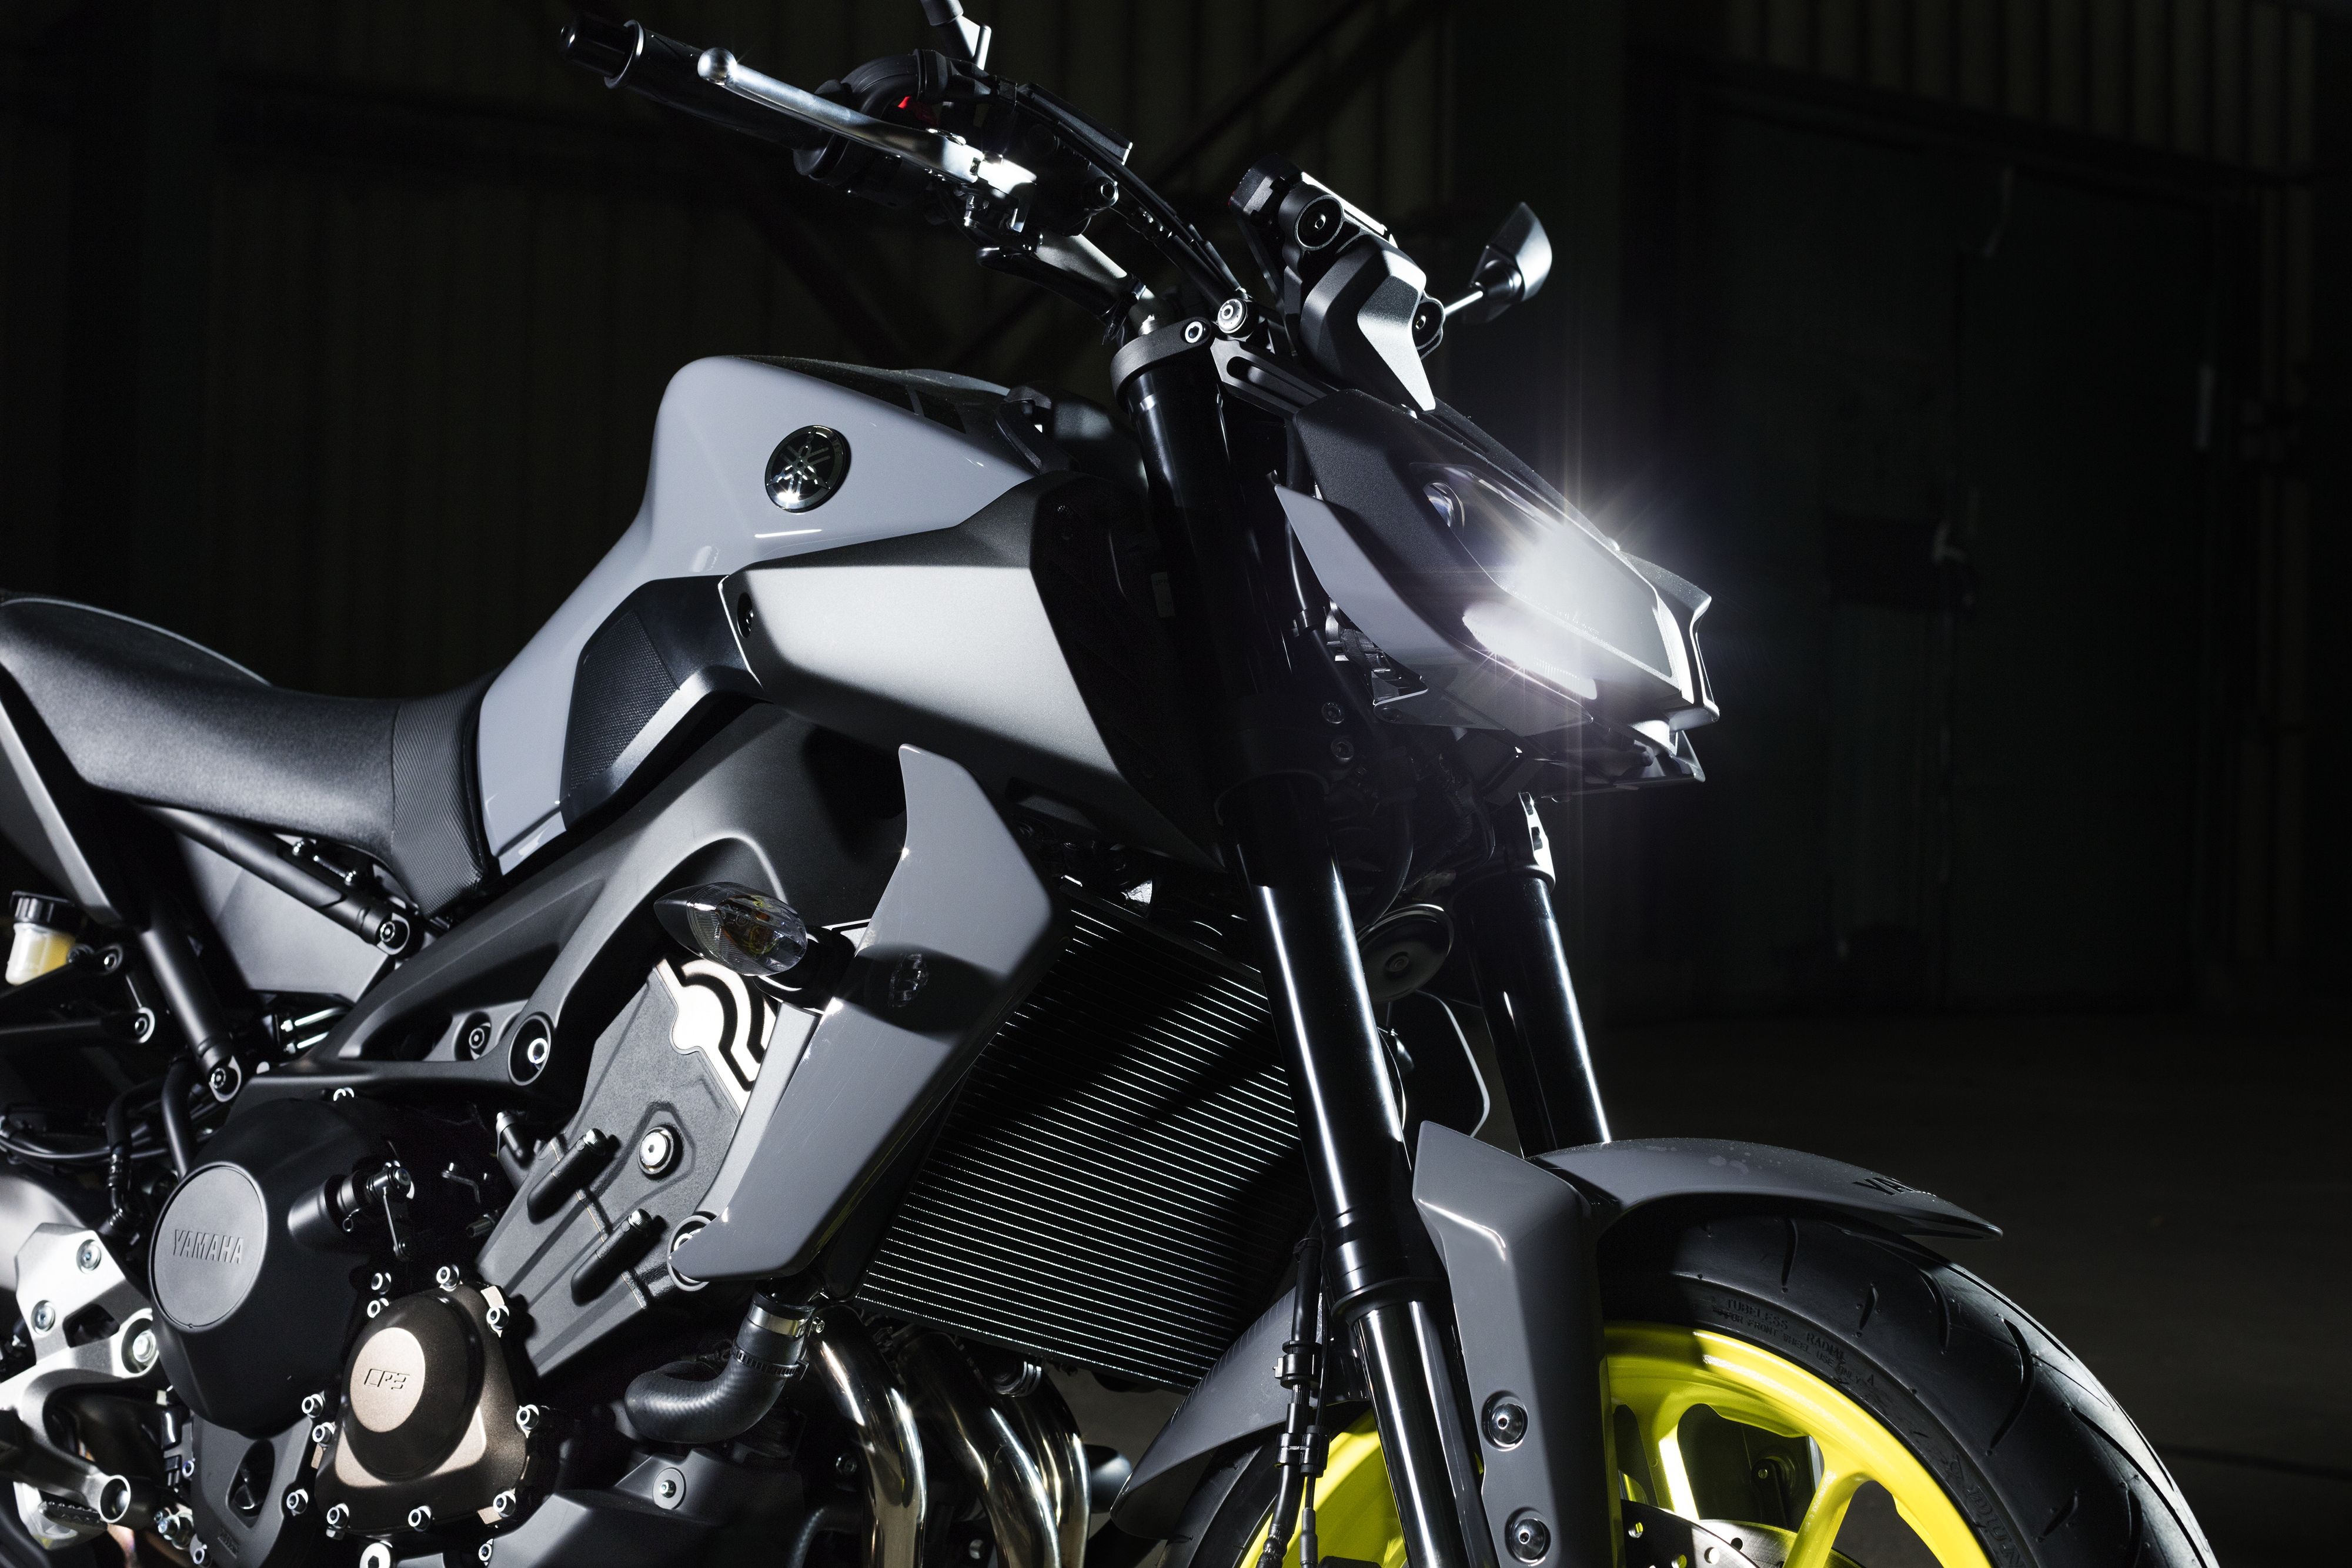 Yamaha MT-09 gets MT-10 makeover and upgrades for 2017